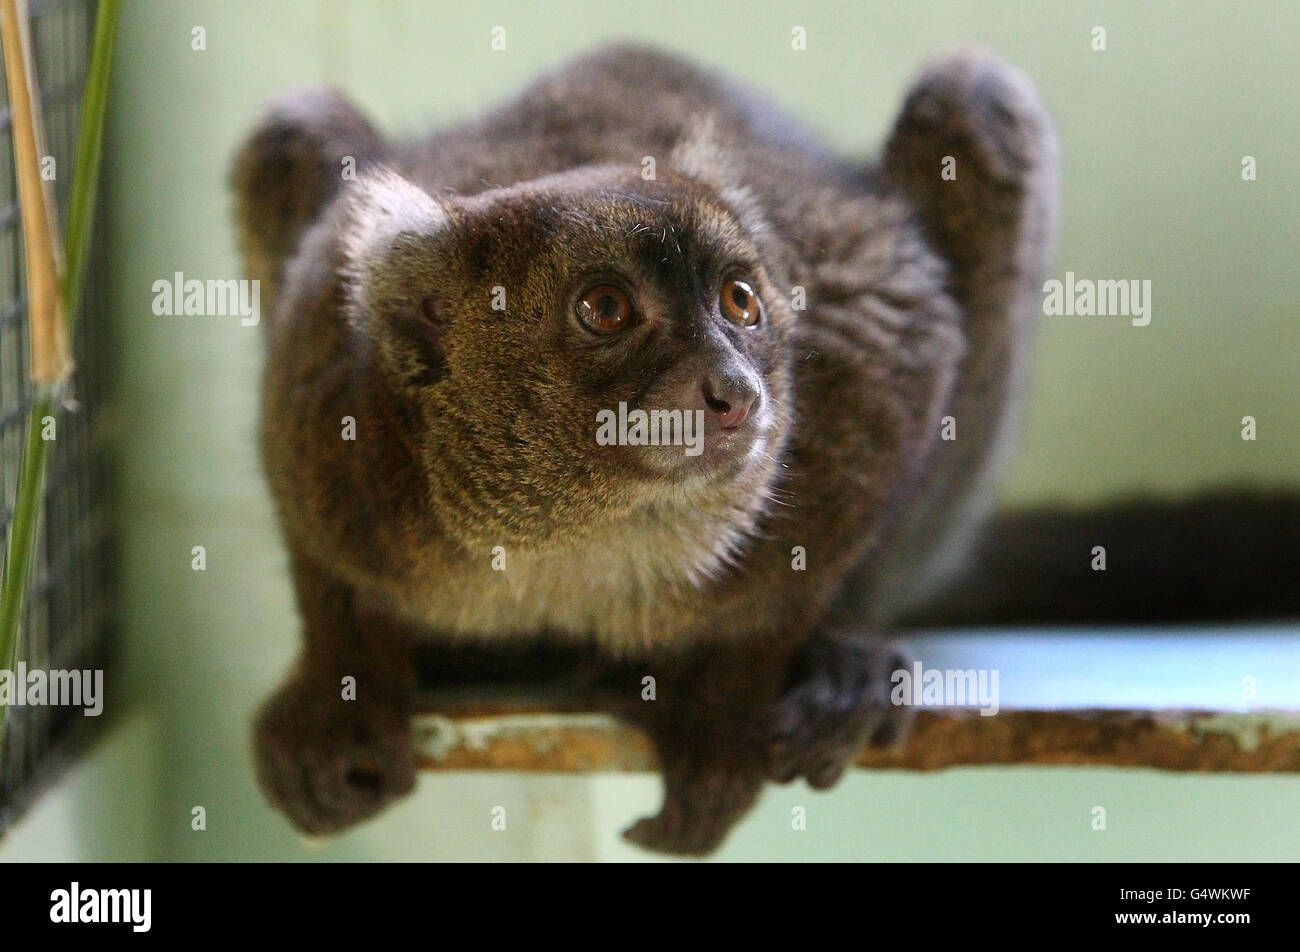 A critically endangered female Greater Bamboo Lemur, one of only 19 in animal collections throughout the world looks around her enclosure after arriving from France at Port Lympne Wild Animal Park near Ashford, Kent. Stock Photo